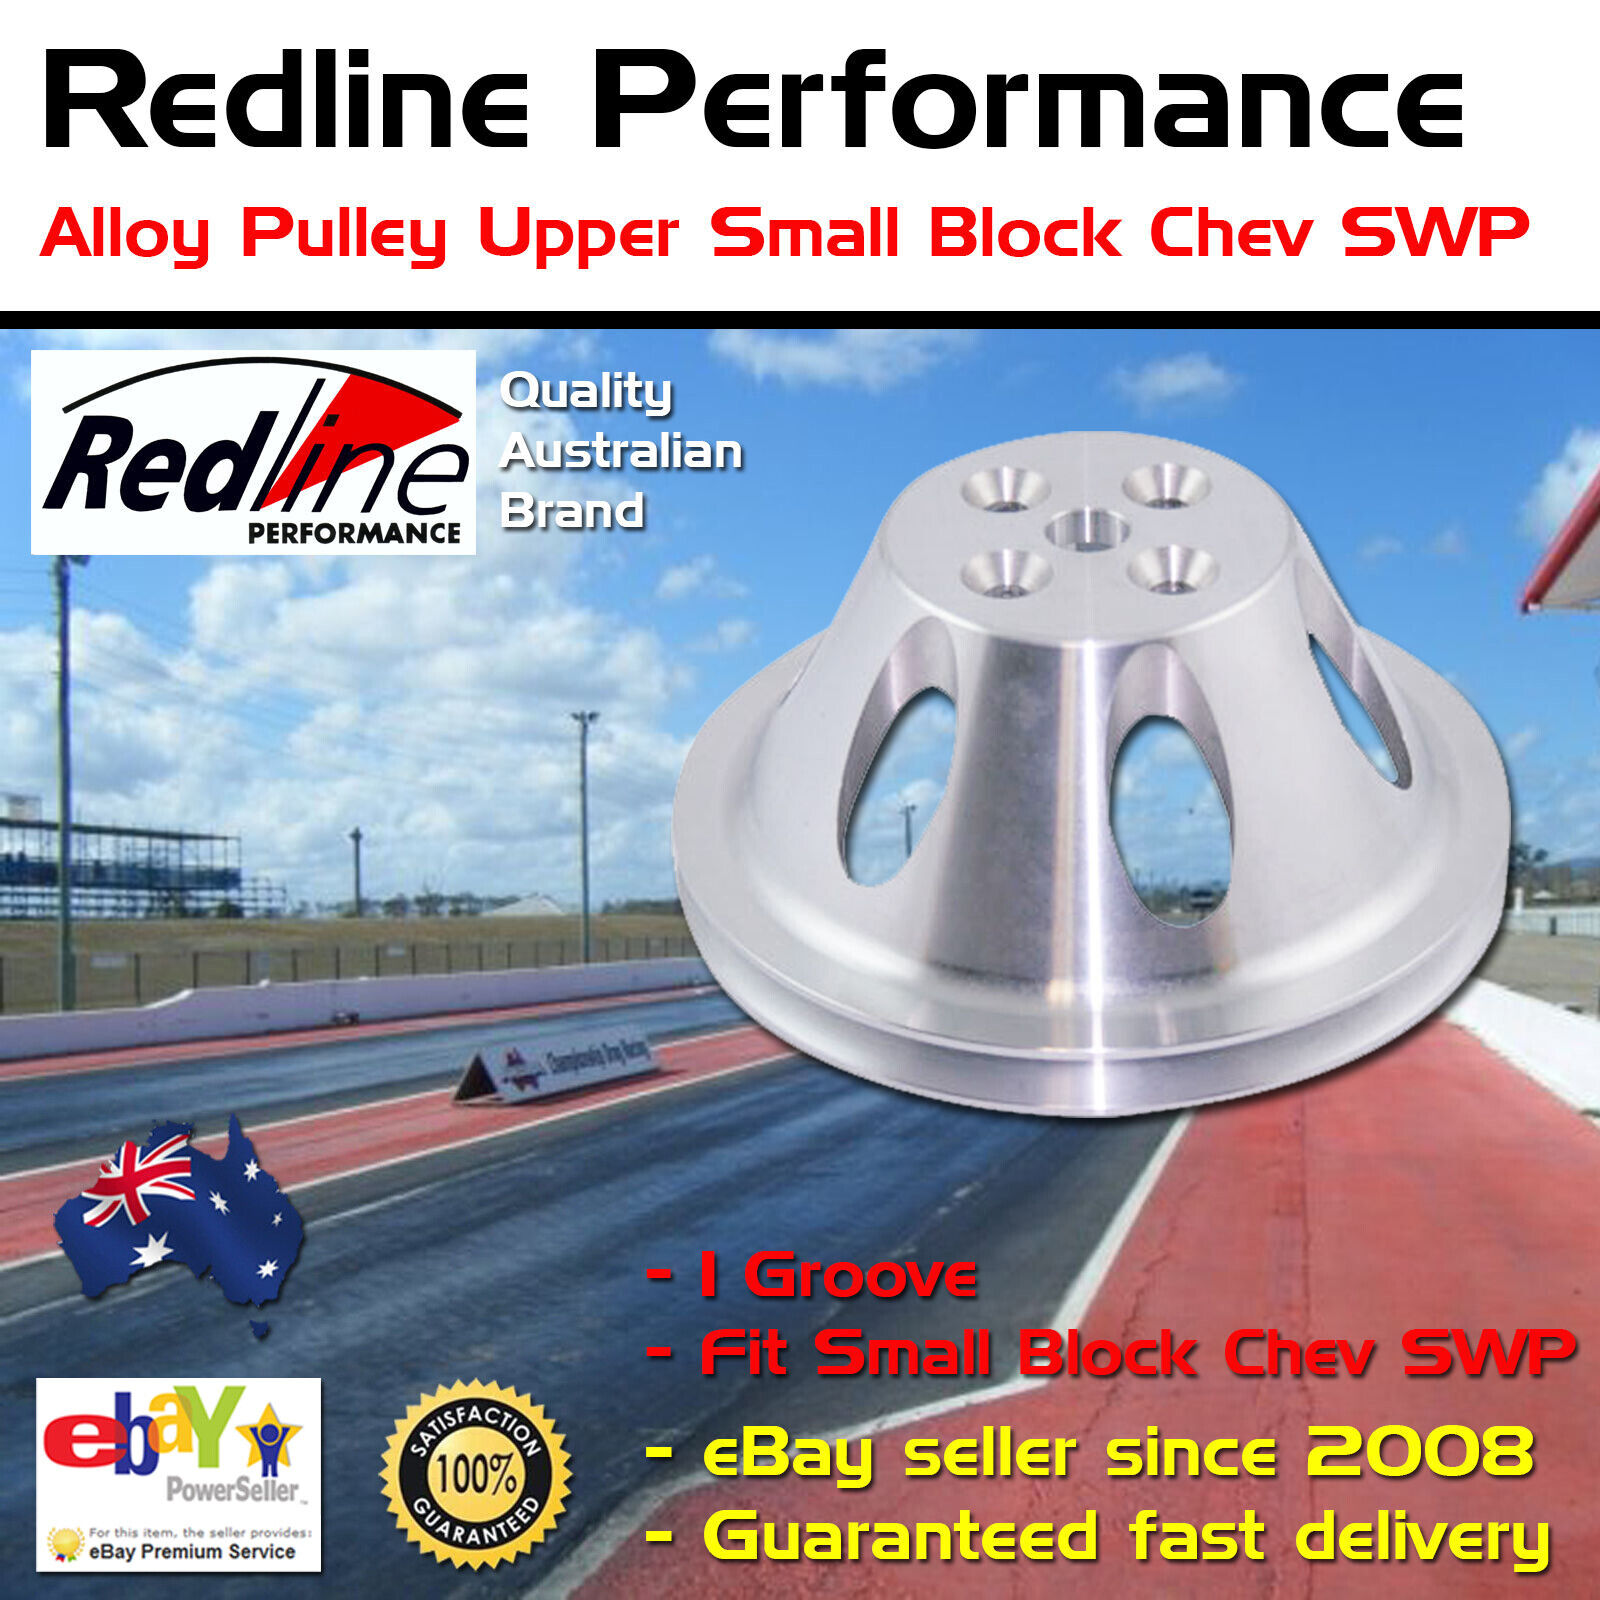 New Redline Alloy Pulley Upper 1 Groove Small Block Chev SWP